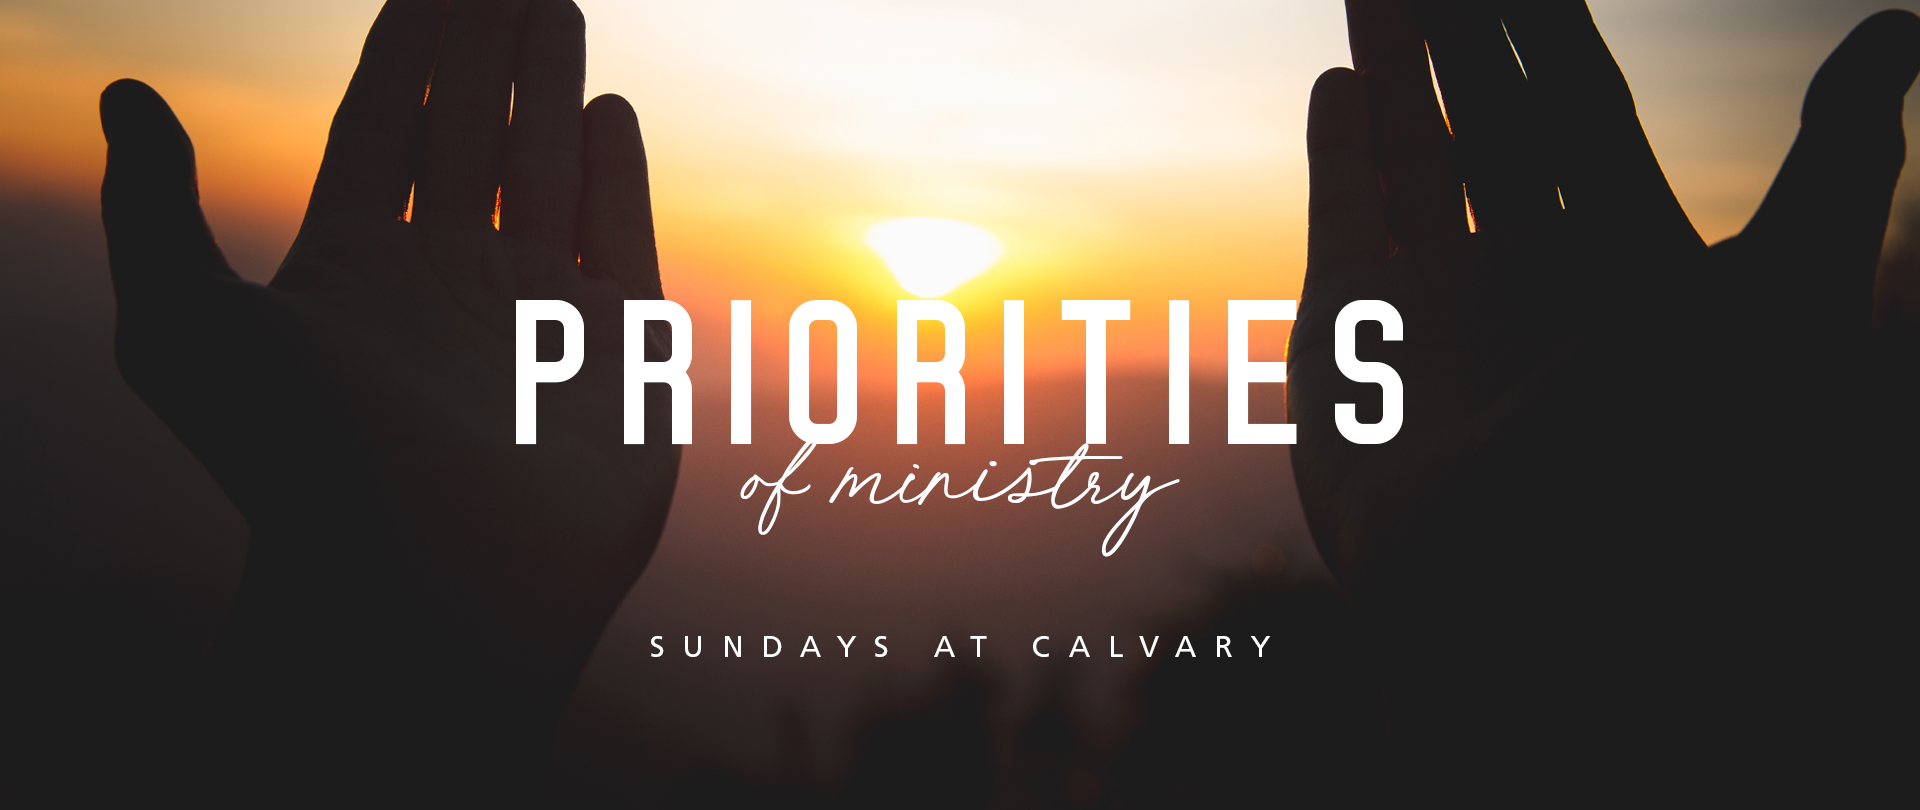 Priorities of Ministry
6:00 PM as scheduled
